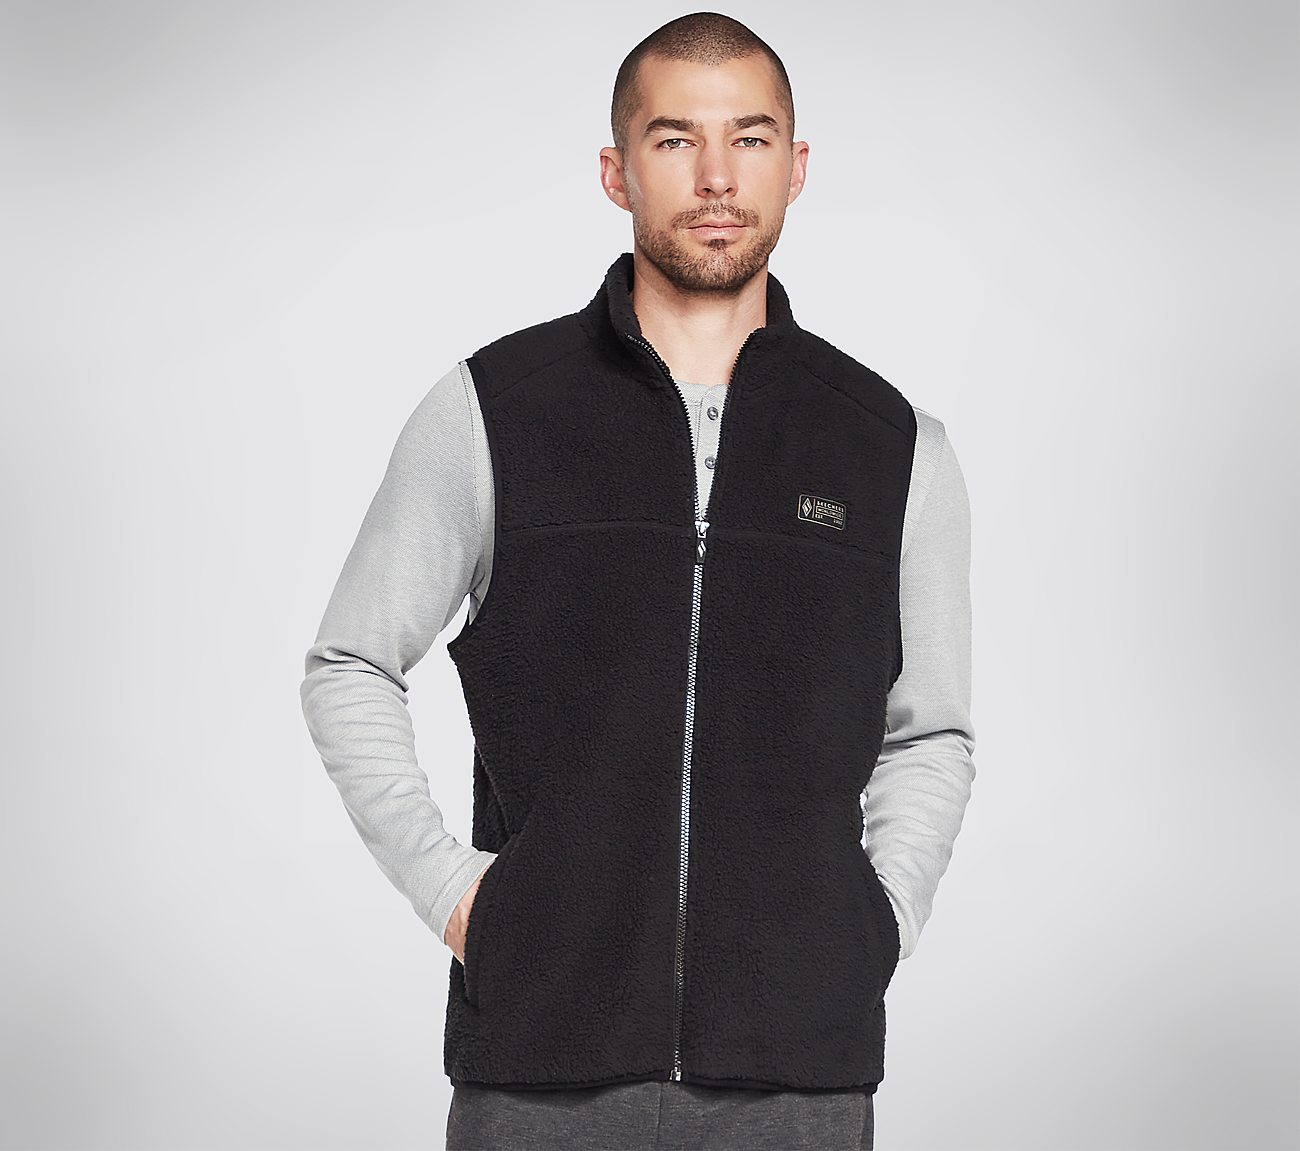 SKECHERS SHERPA VEST, BBBBLACK Apparels Lateral View